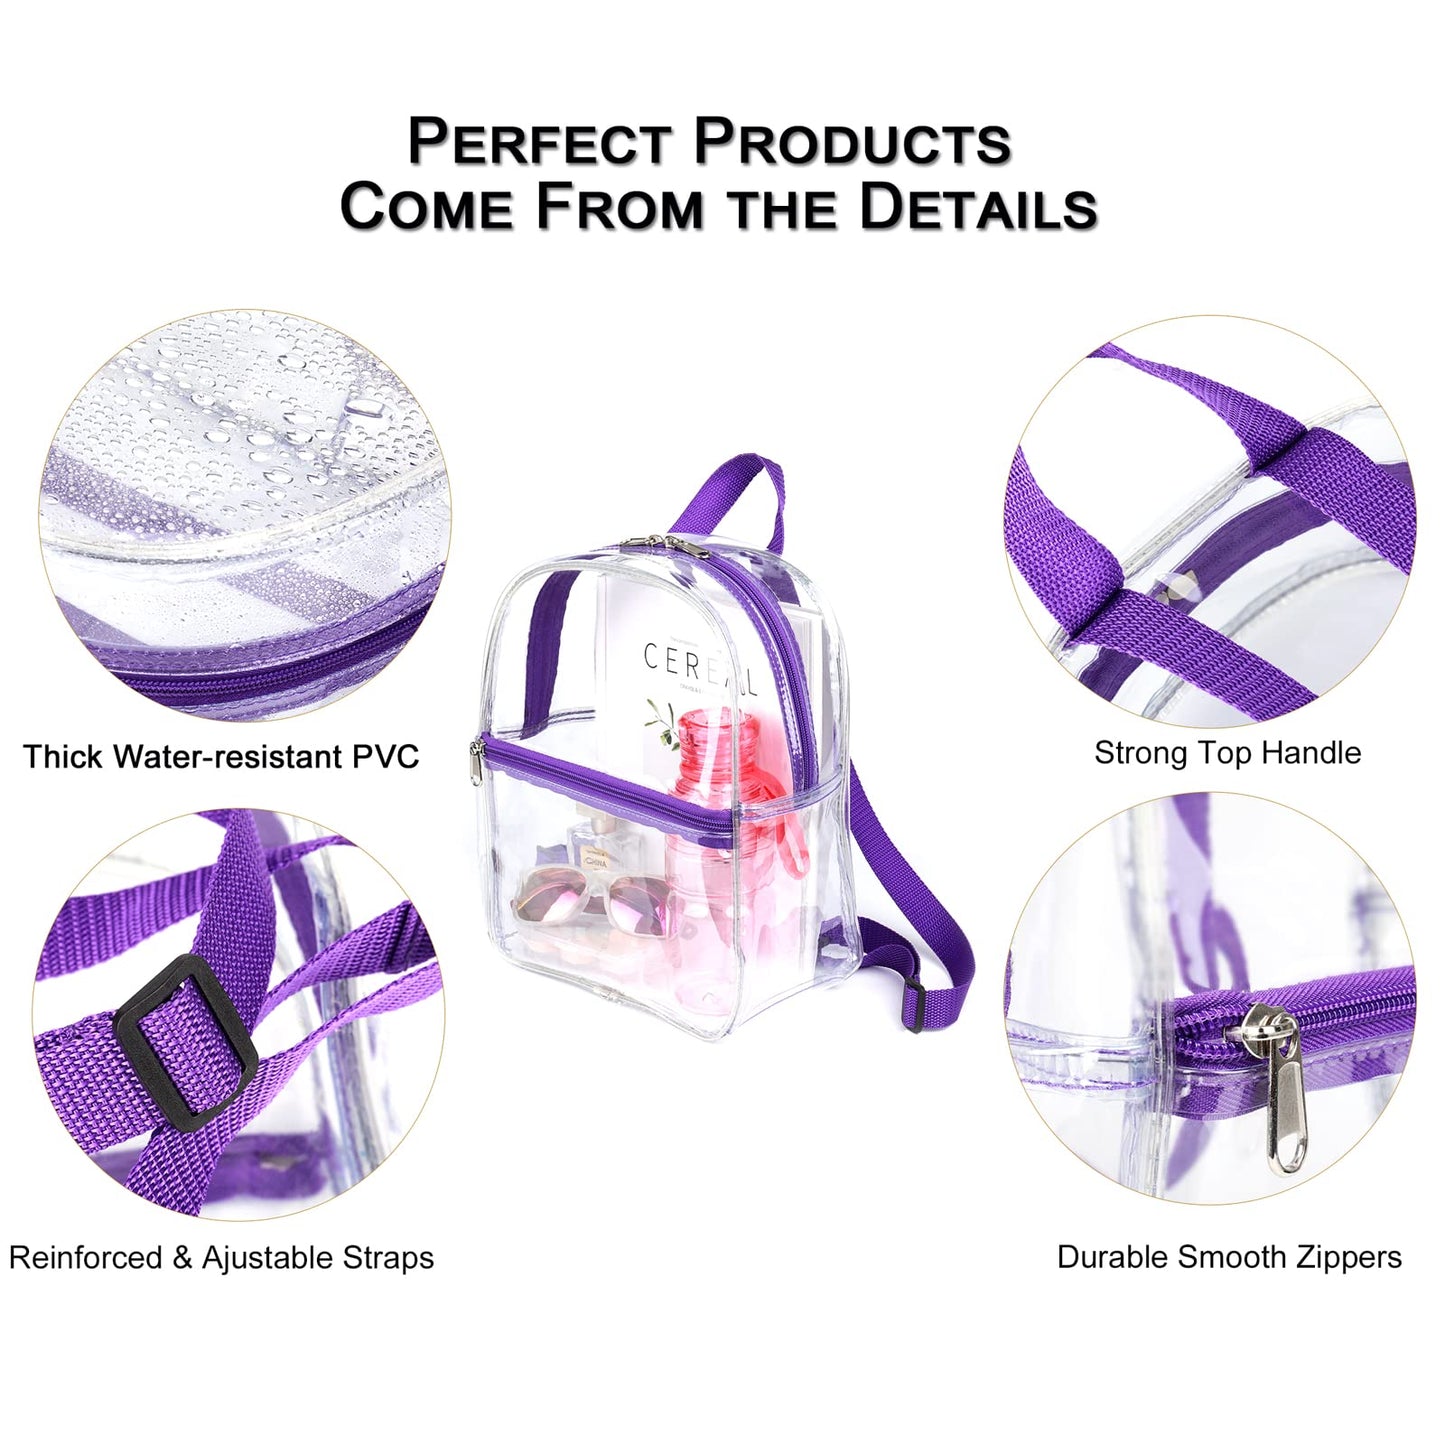 Keepcross Small Clear Backpack Stadium Approved Mini for Women Men